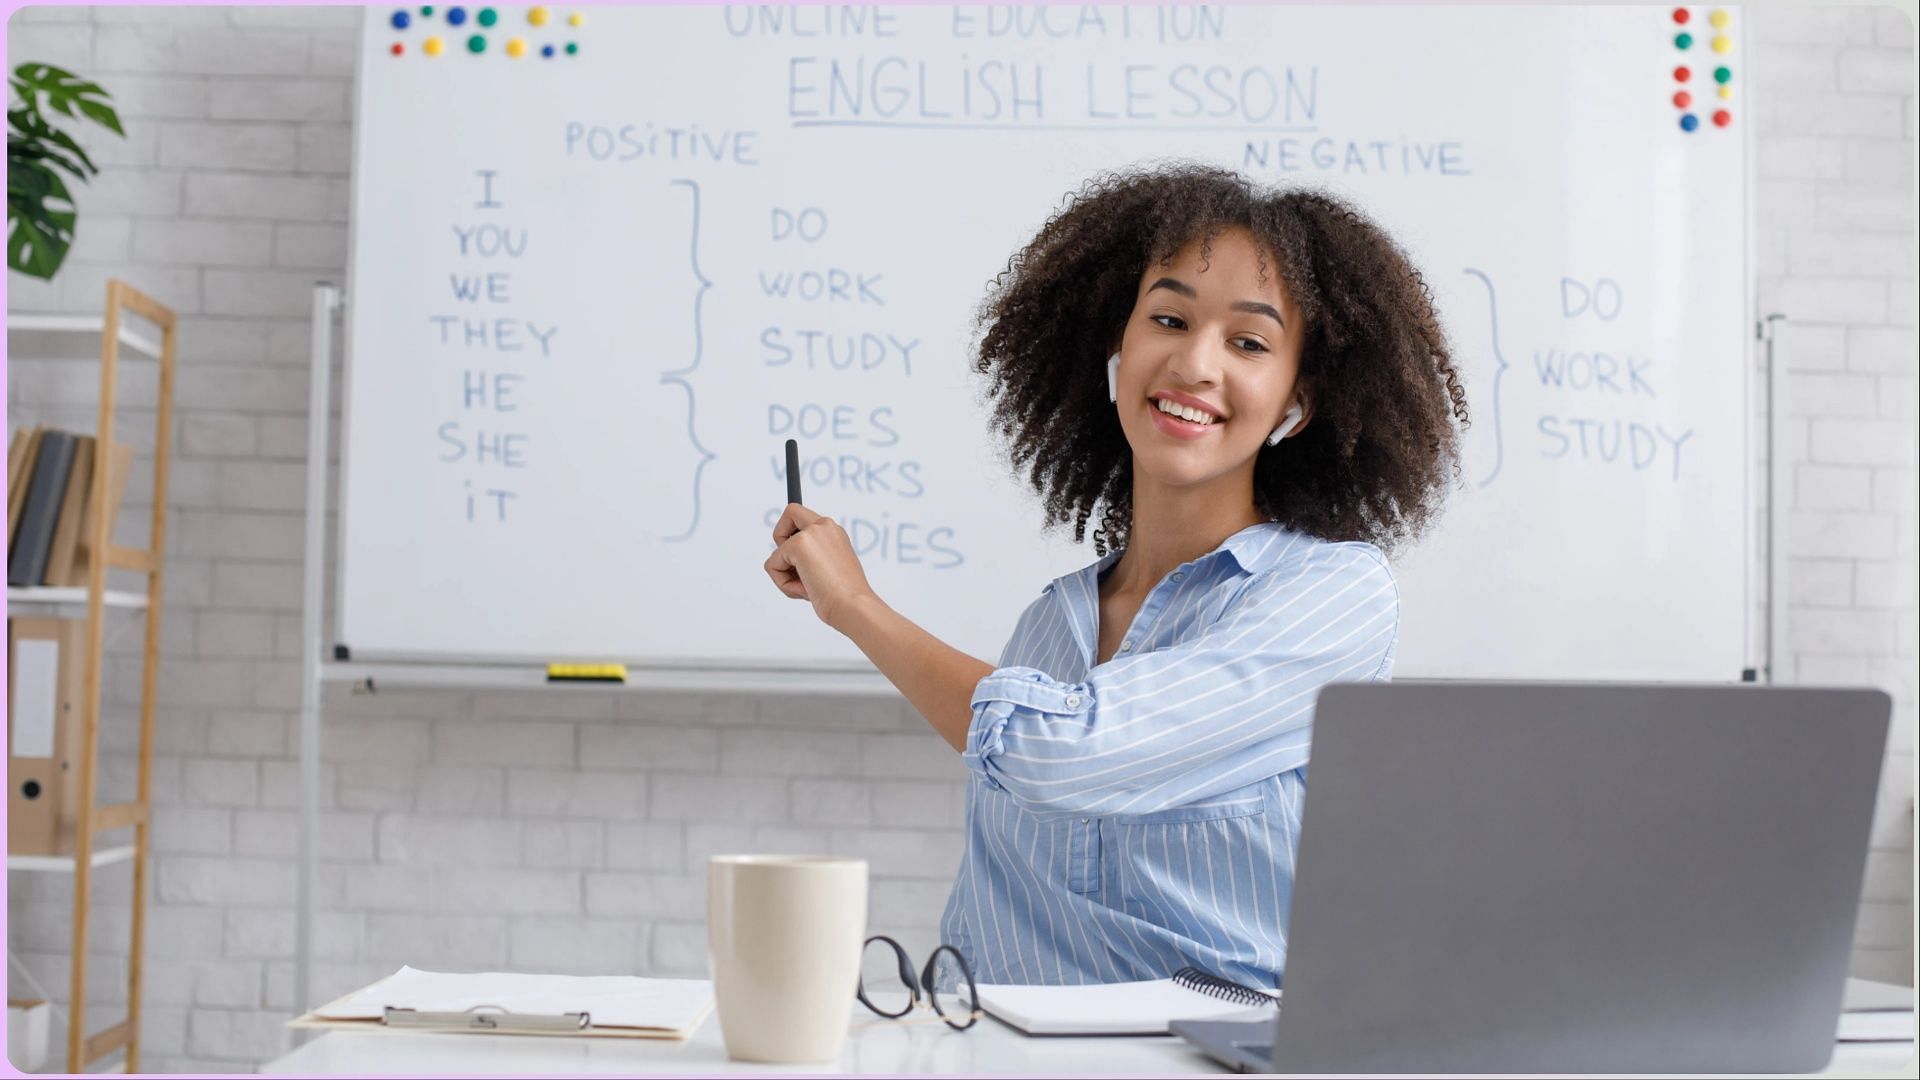 Teachers across the country can enjoy freebies, special discounts, and other deals this Teacher Appreciation Week (Image via Prostock-Studio/ iStockphoto/ Getty Images)